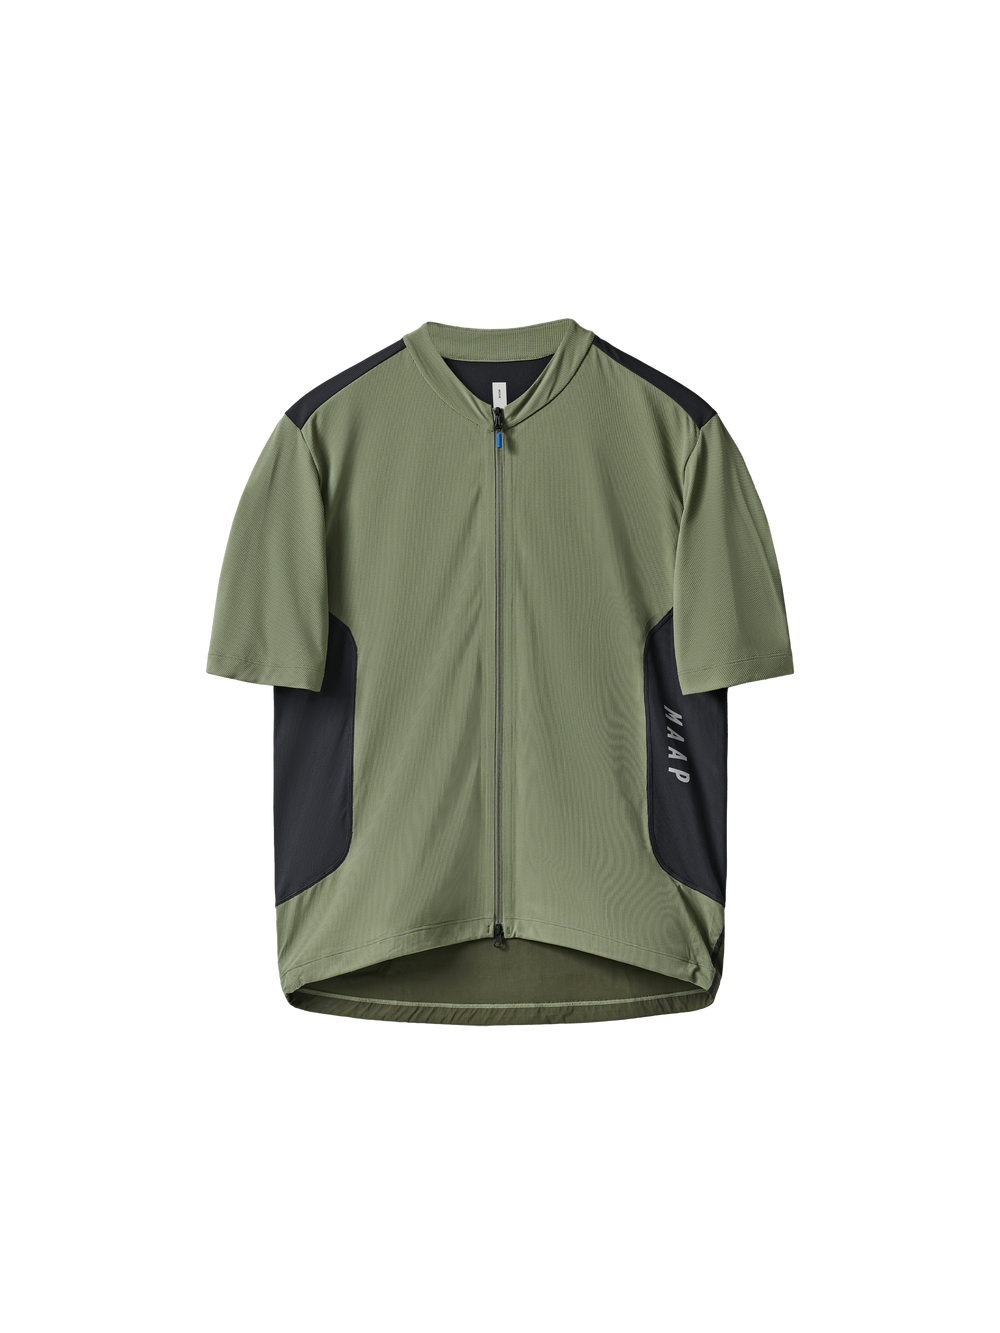 Product Image for Alt_Road Zip Tee